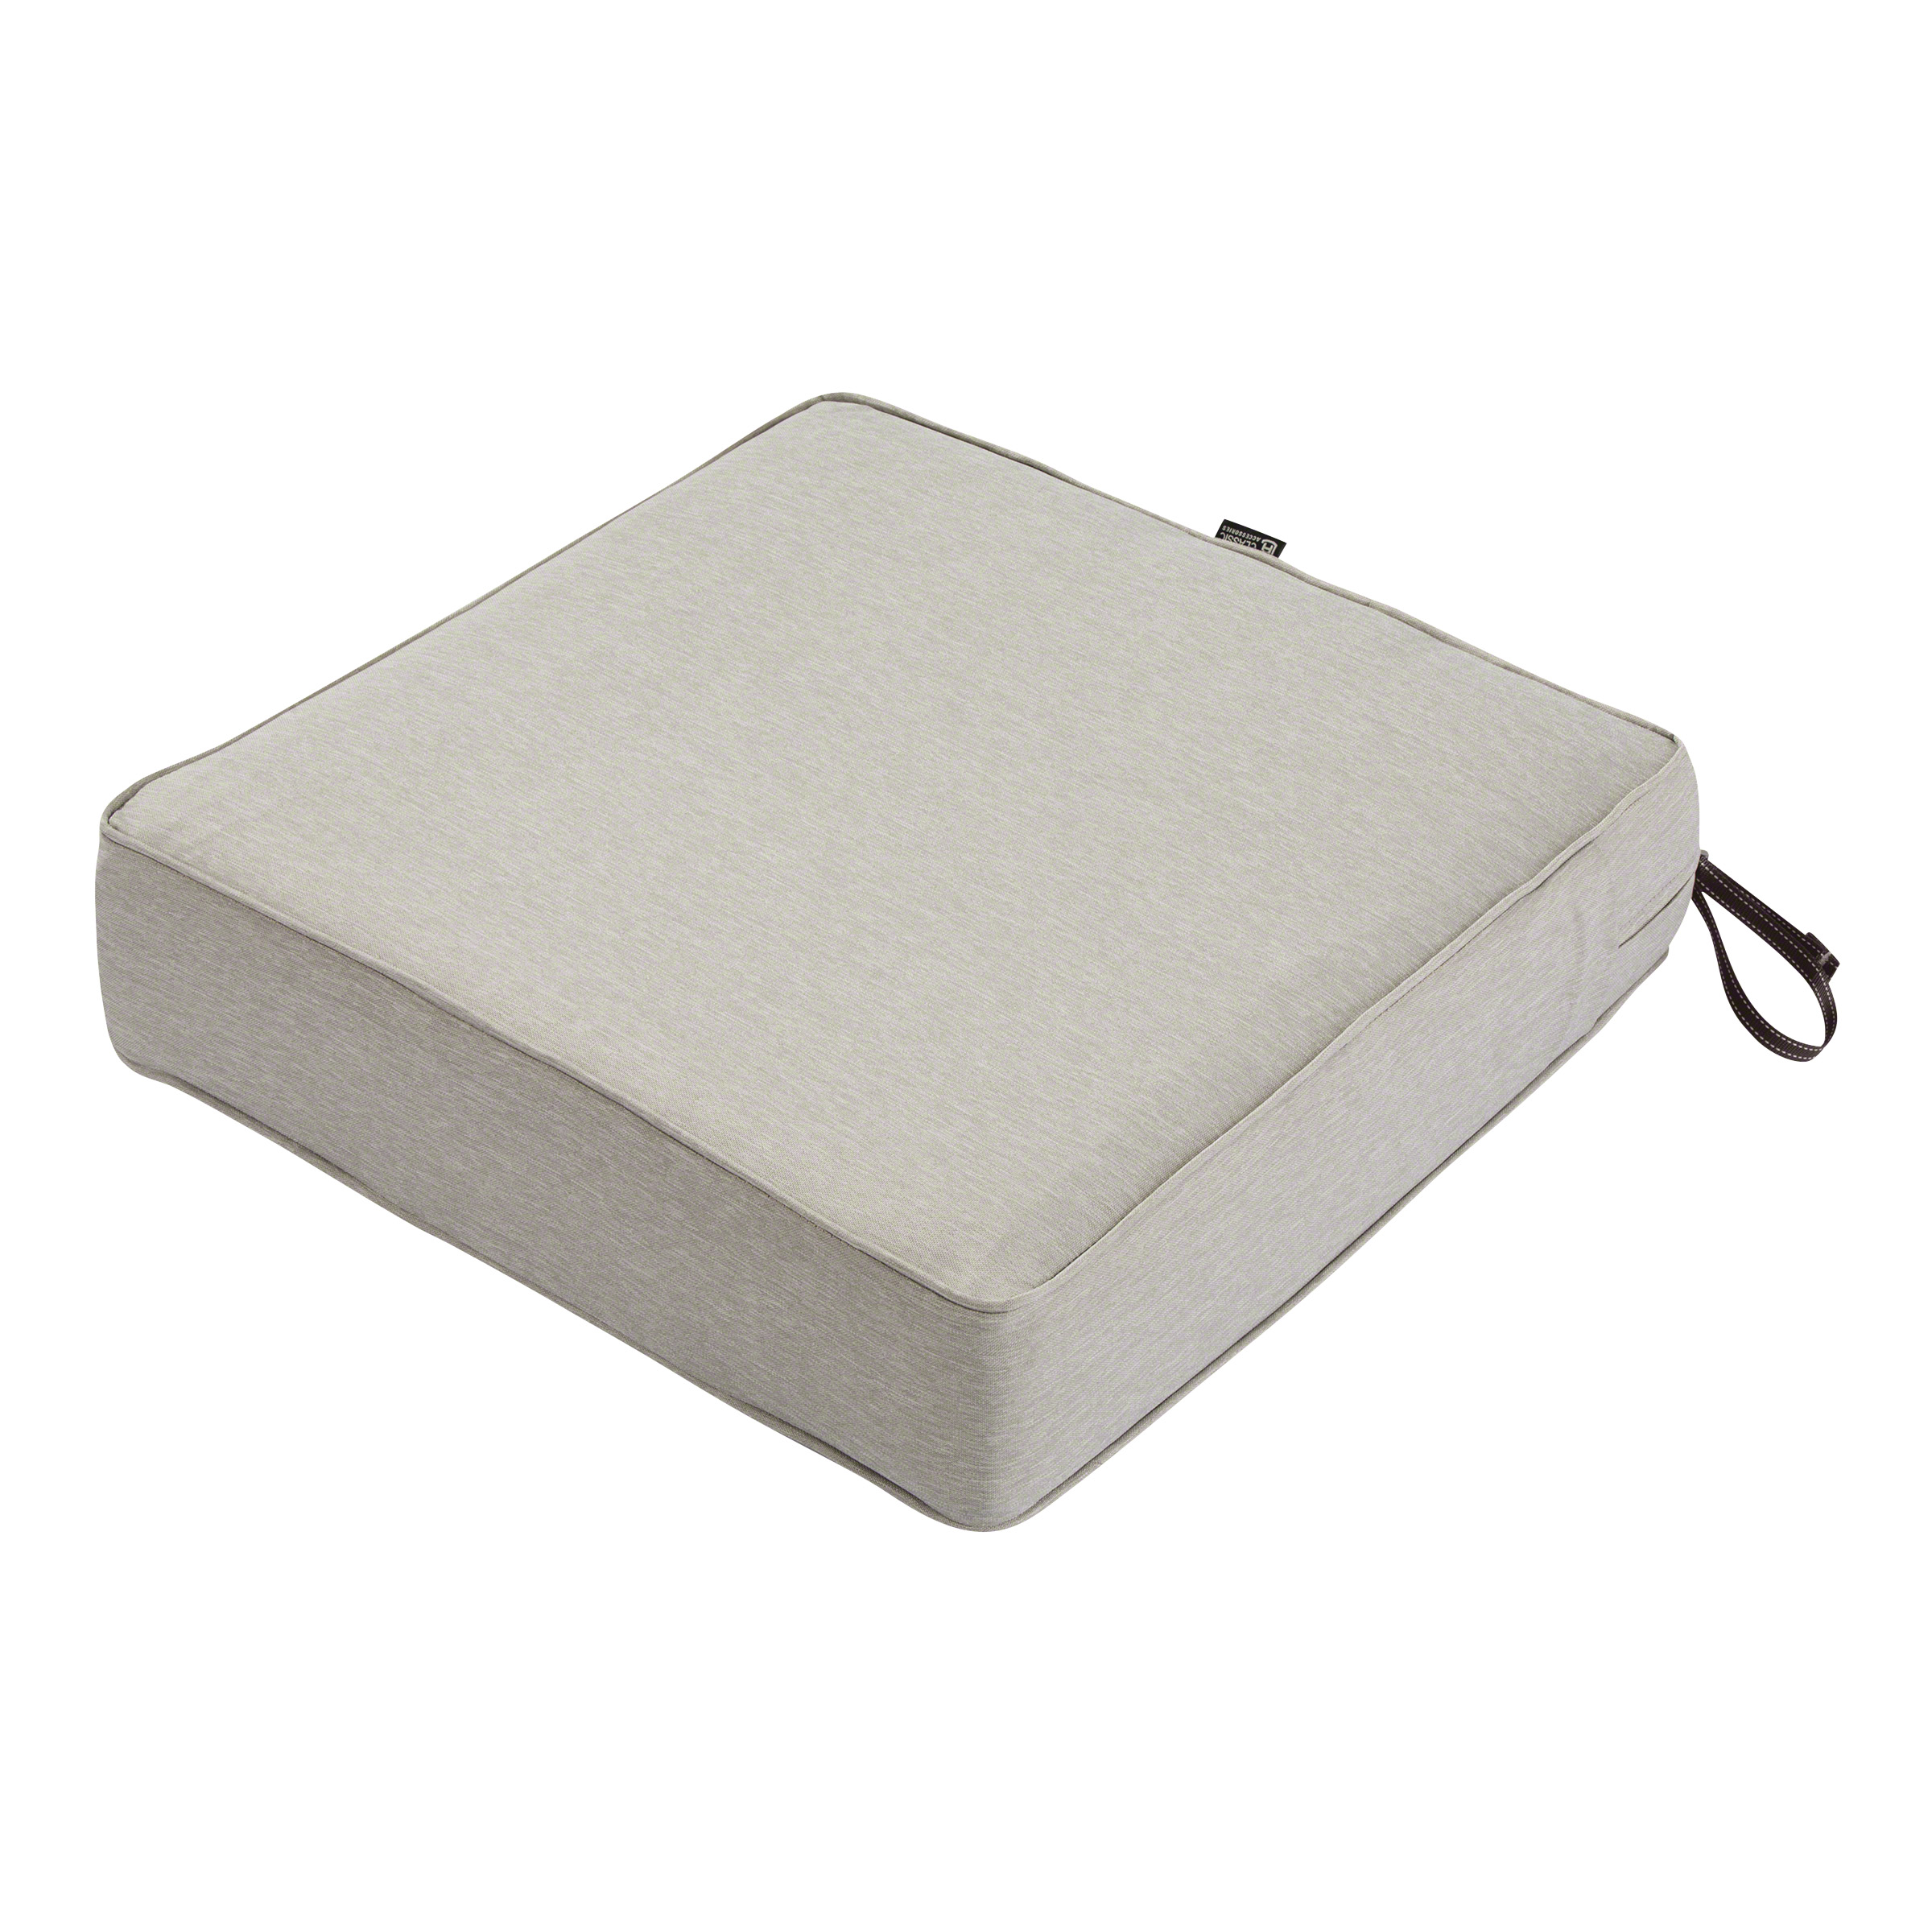 Classic Accessories Square Patio Lounge Seat Cushion, Heather Gray, 25"x25"x5"